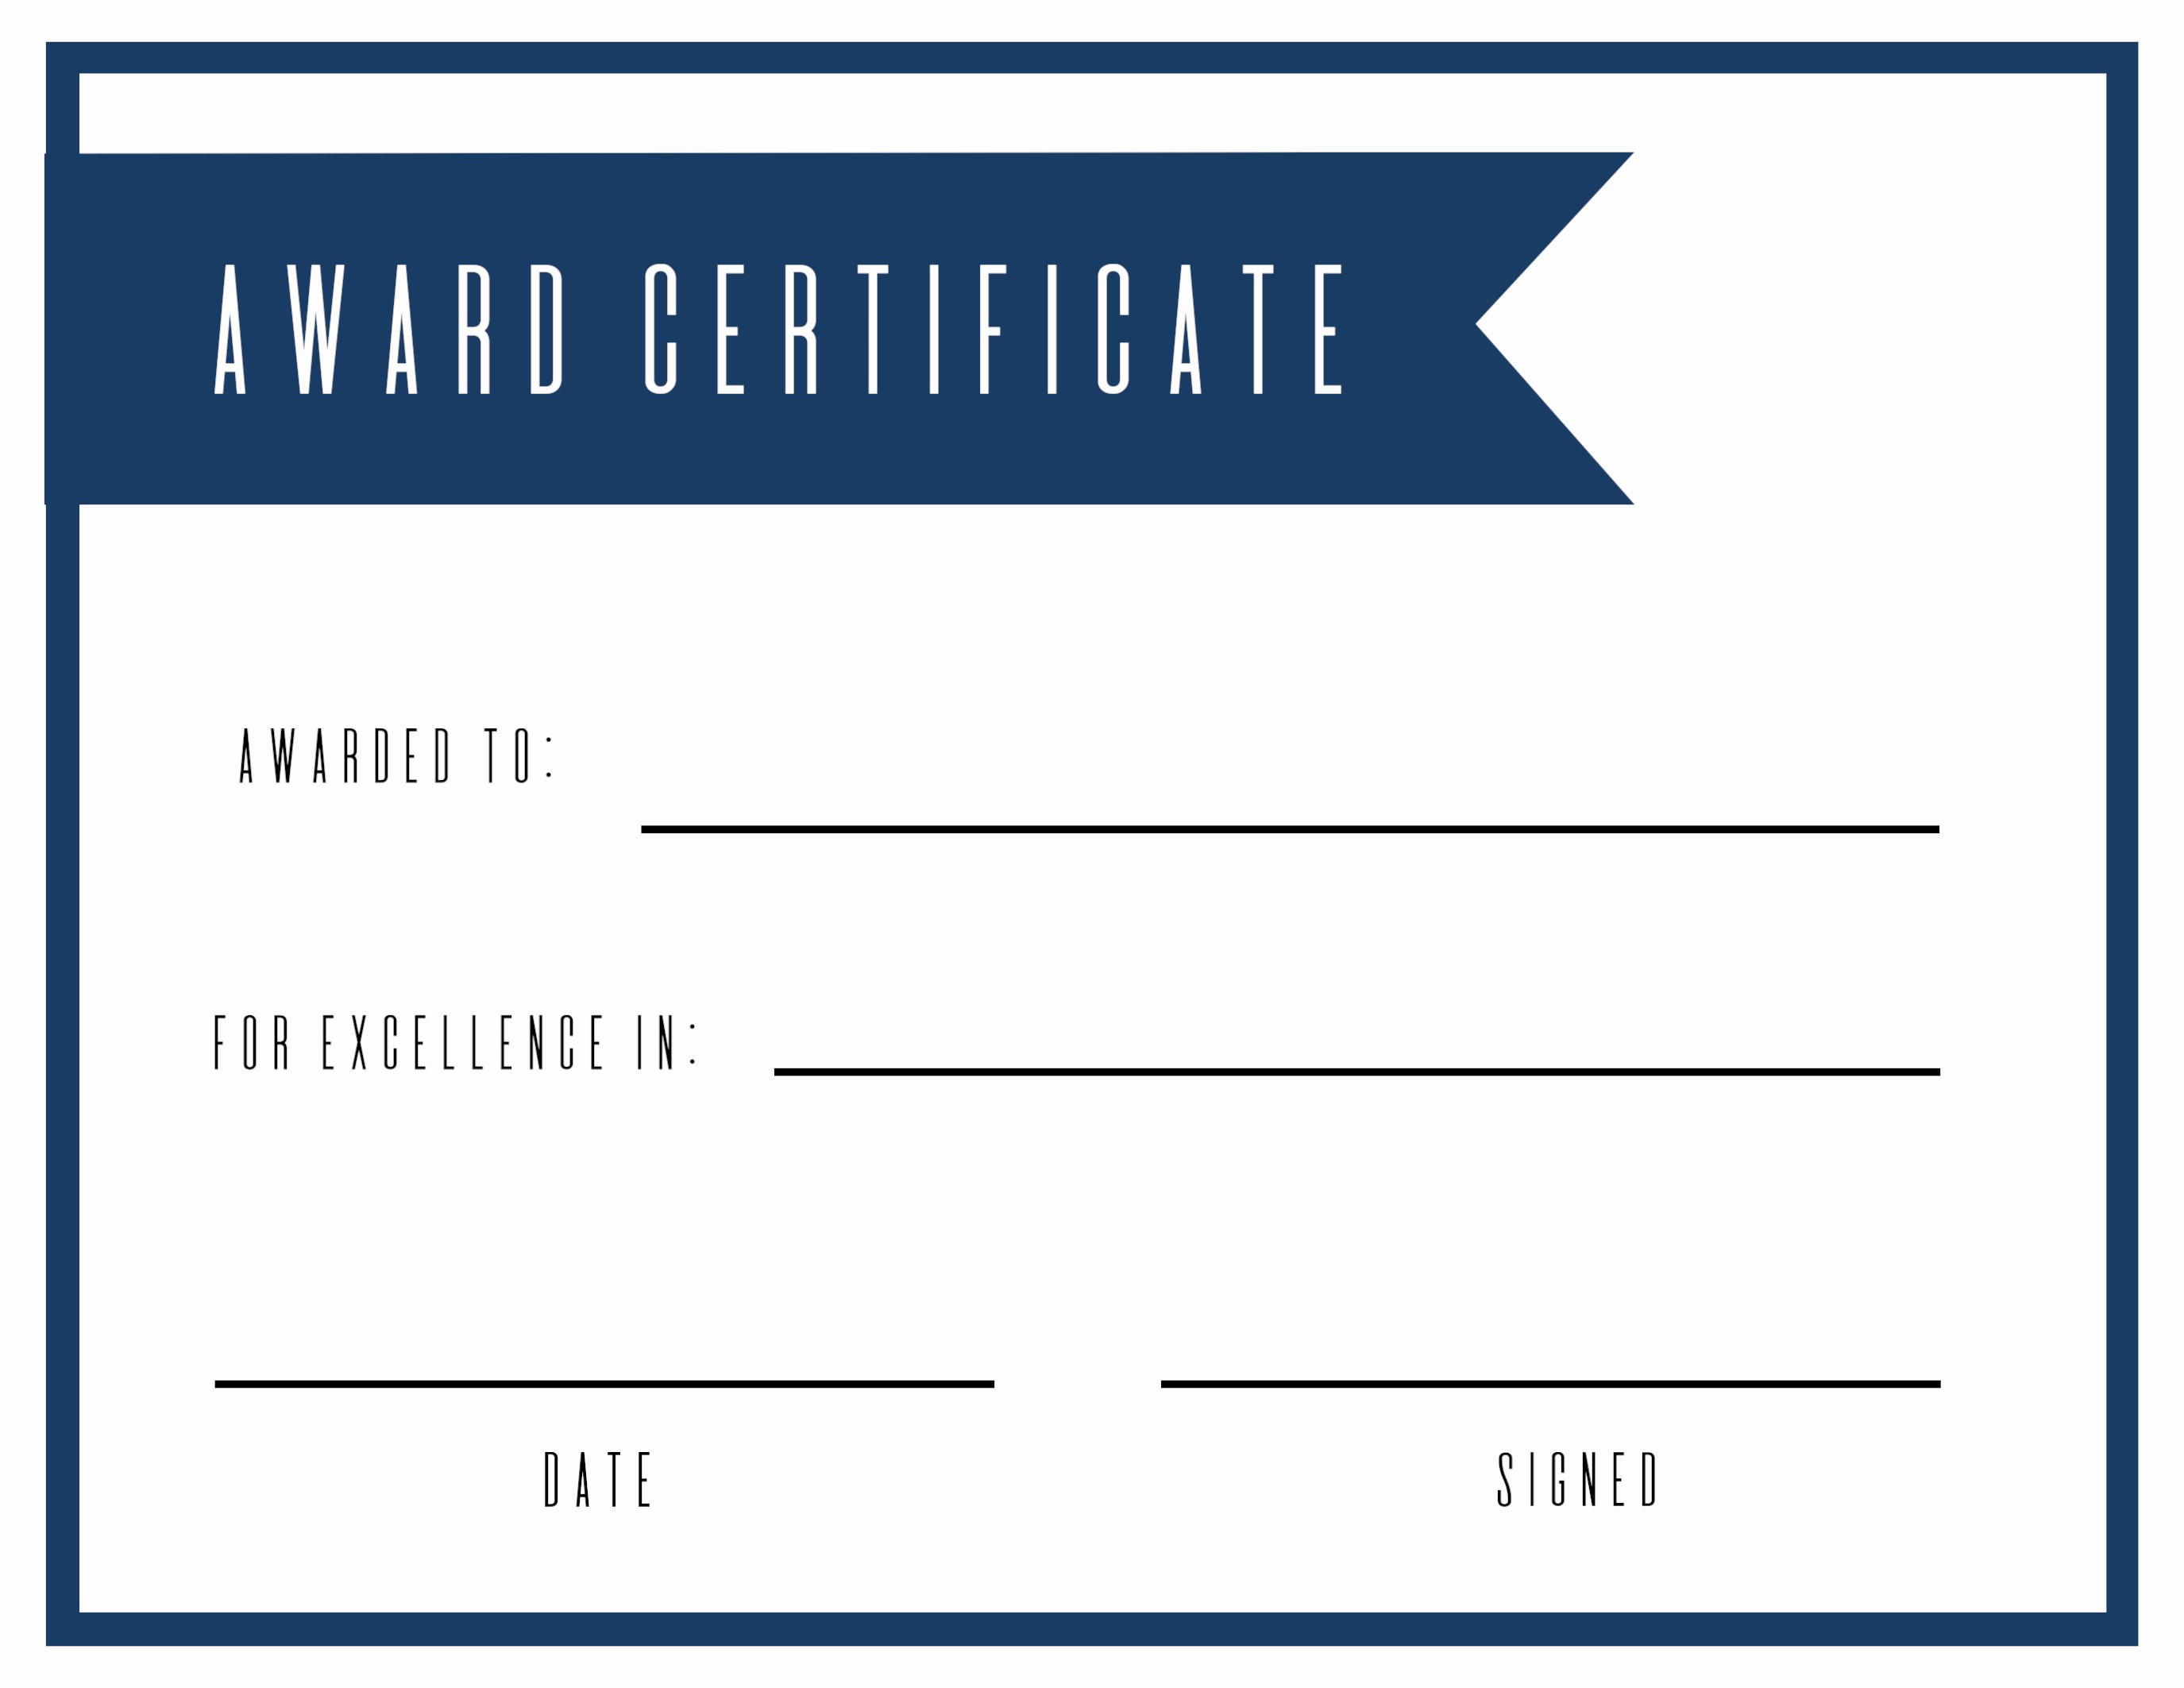 Recognition Certificate Templates Free Printable New Free Printable Award Certificate Template Paper Trail Design